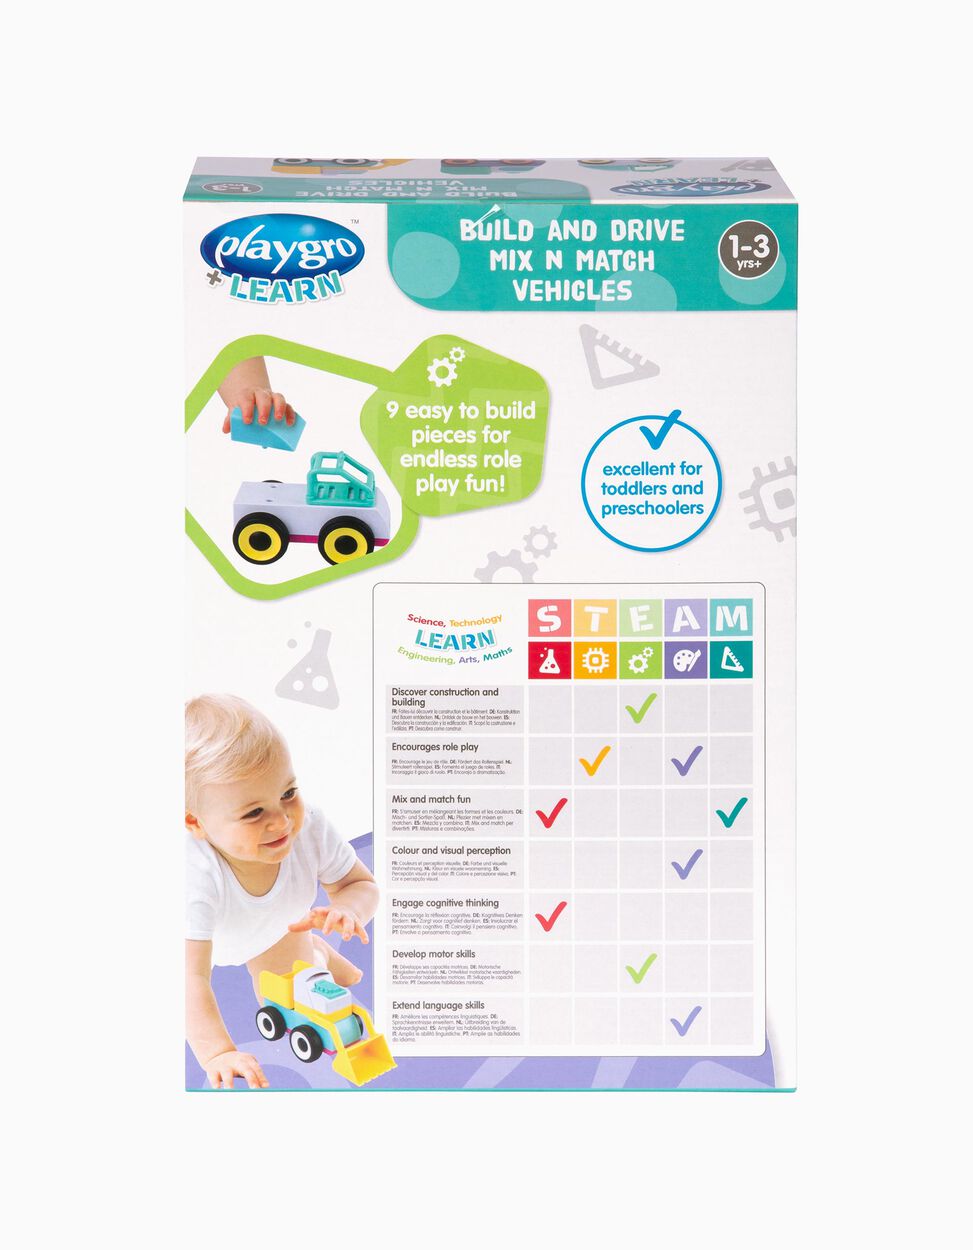 3 Coches de Juguete Mix And Match Playgro